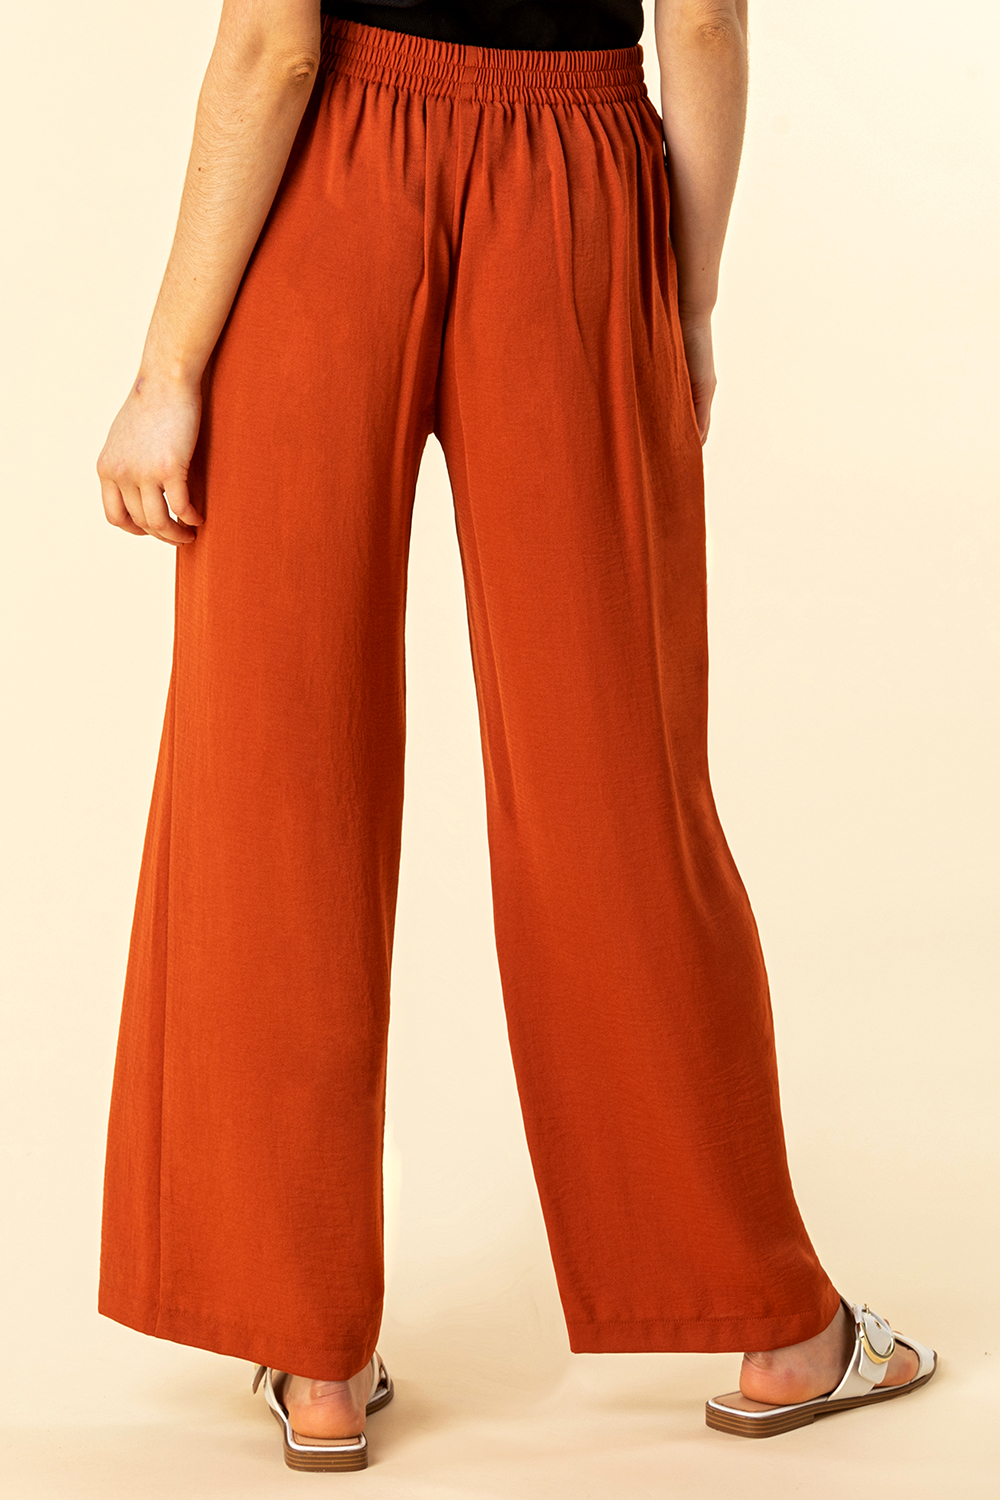 Rust Button Detail Wide Leg Trouser, Image 2 of 4